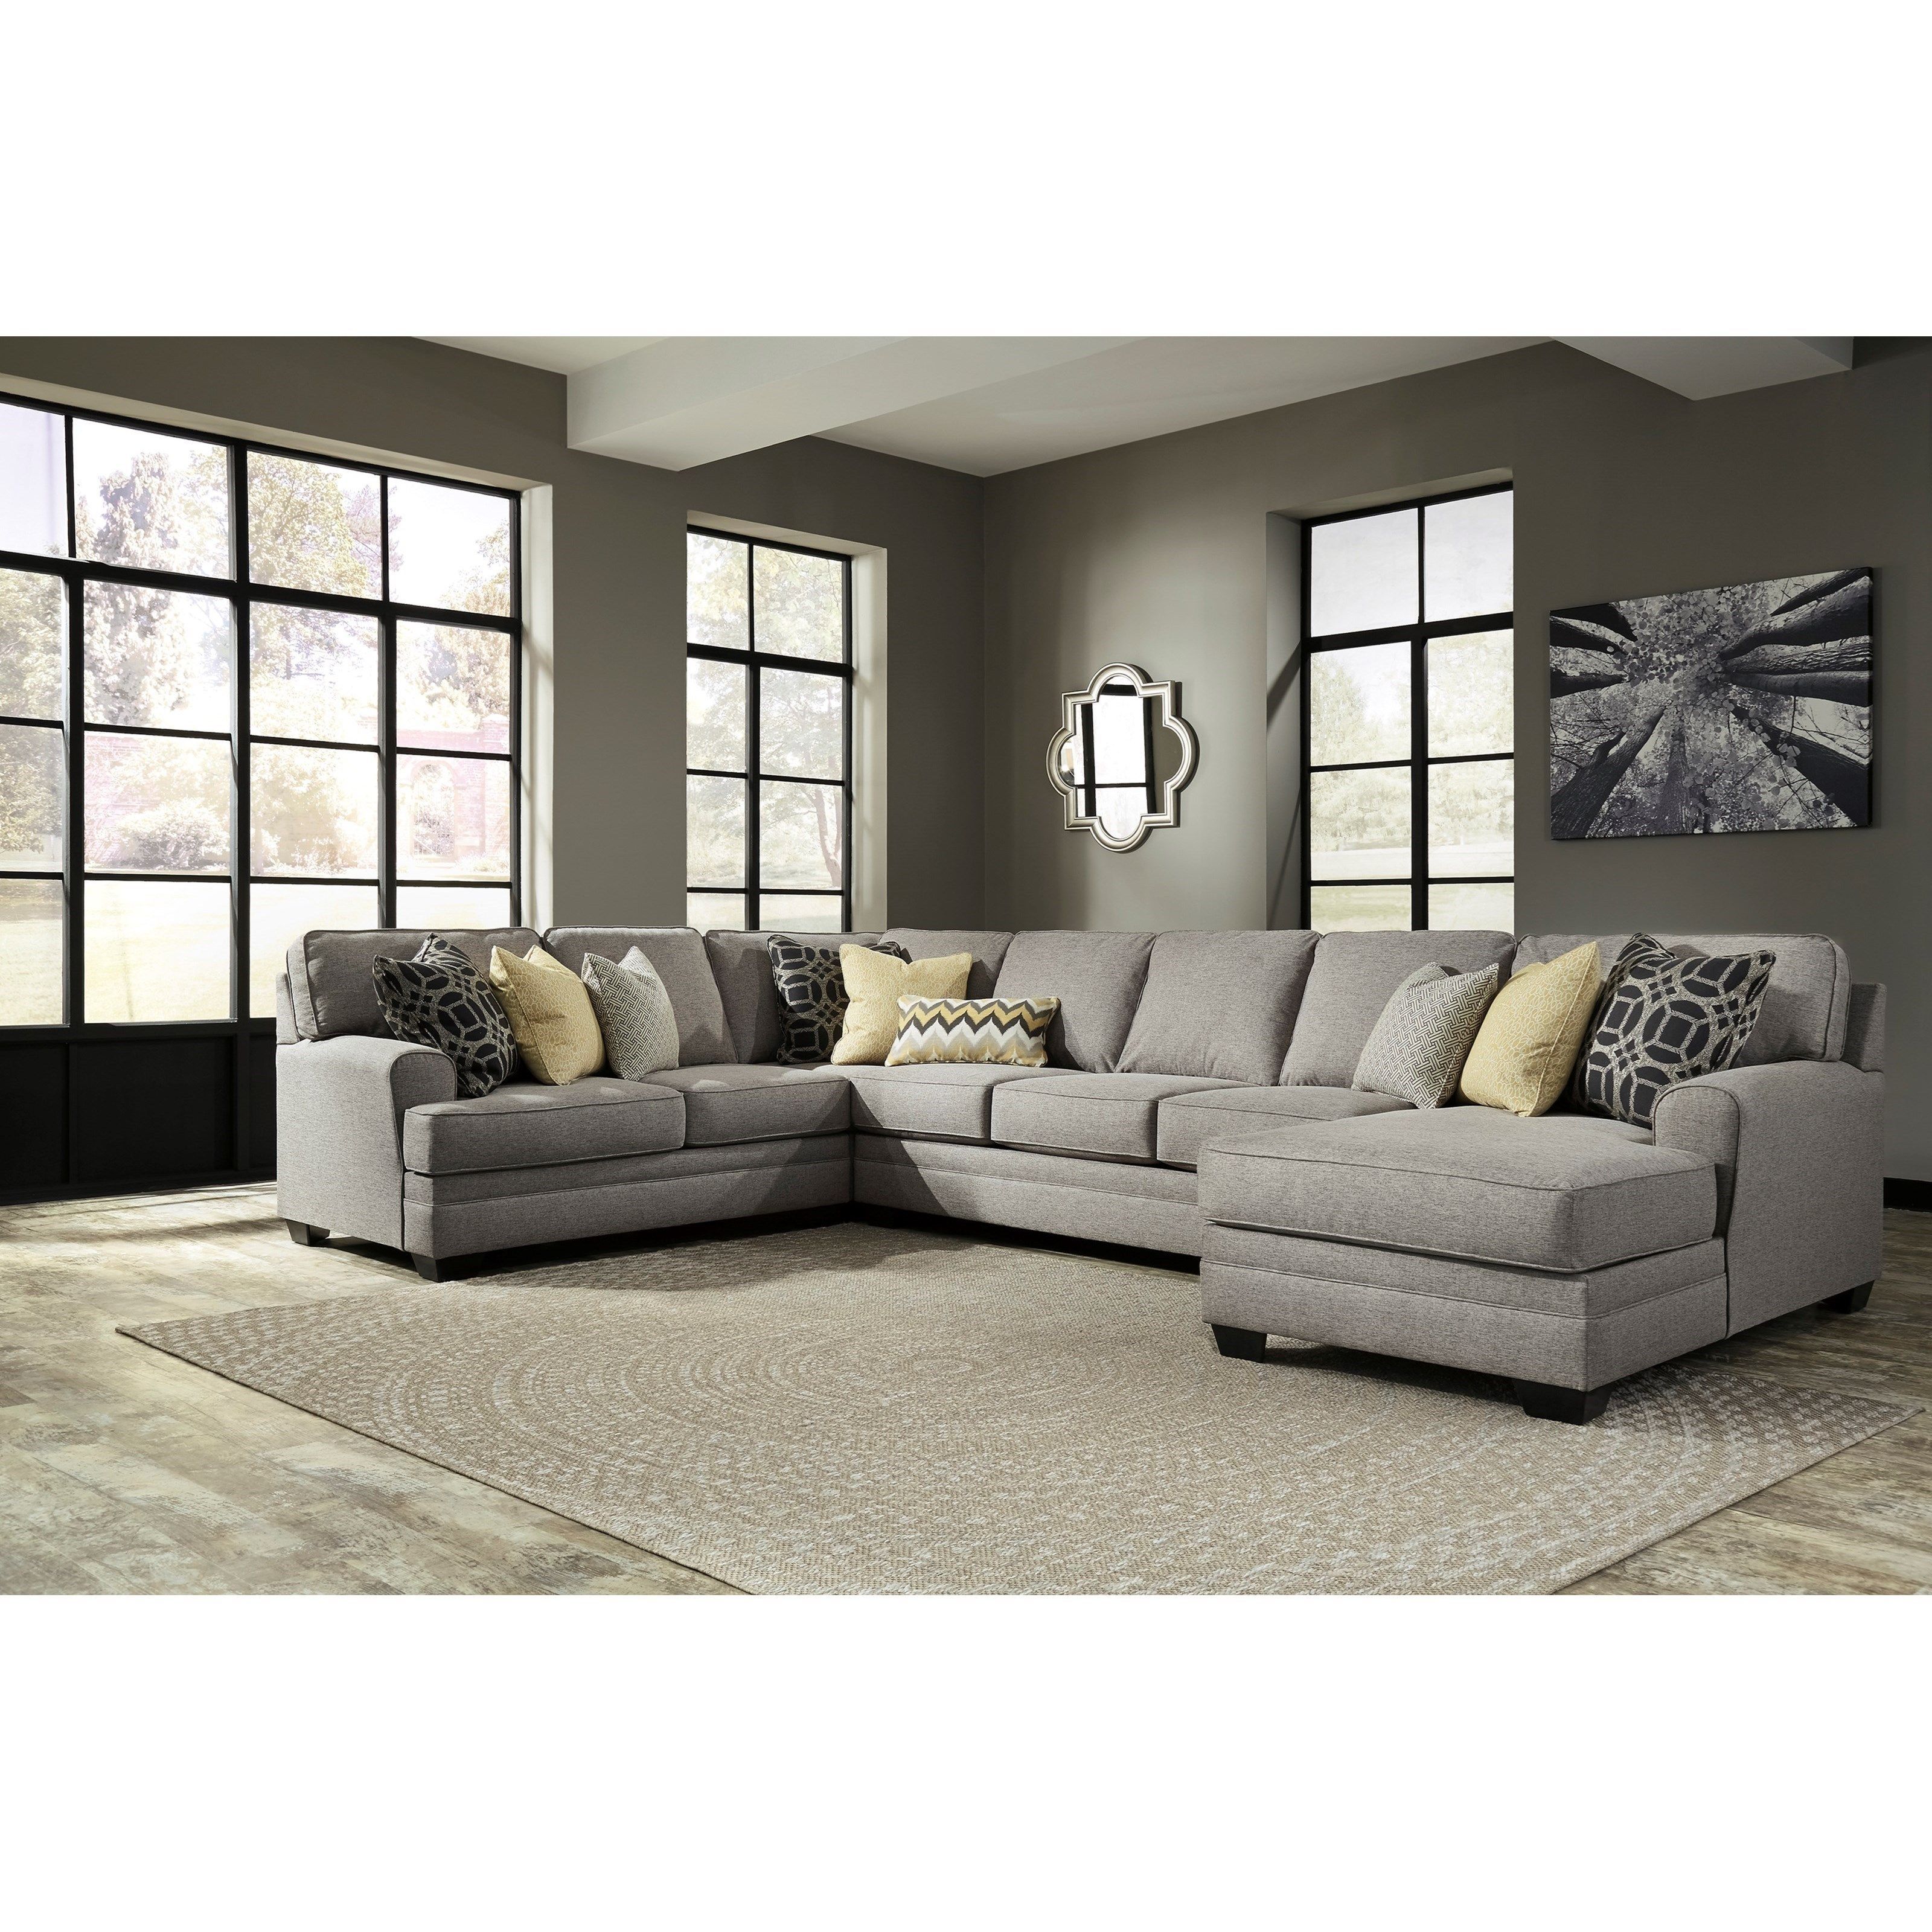 Contemporary 4 Piece Sectional With Chaise & Armless Sofa | Sofas Intended For Pensacola Fl Sectional Sofas (View 9 of 10)